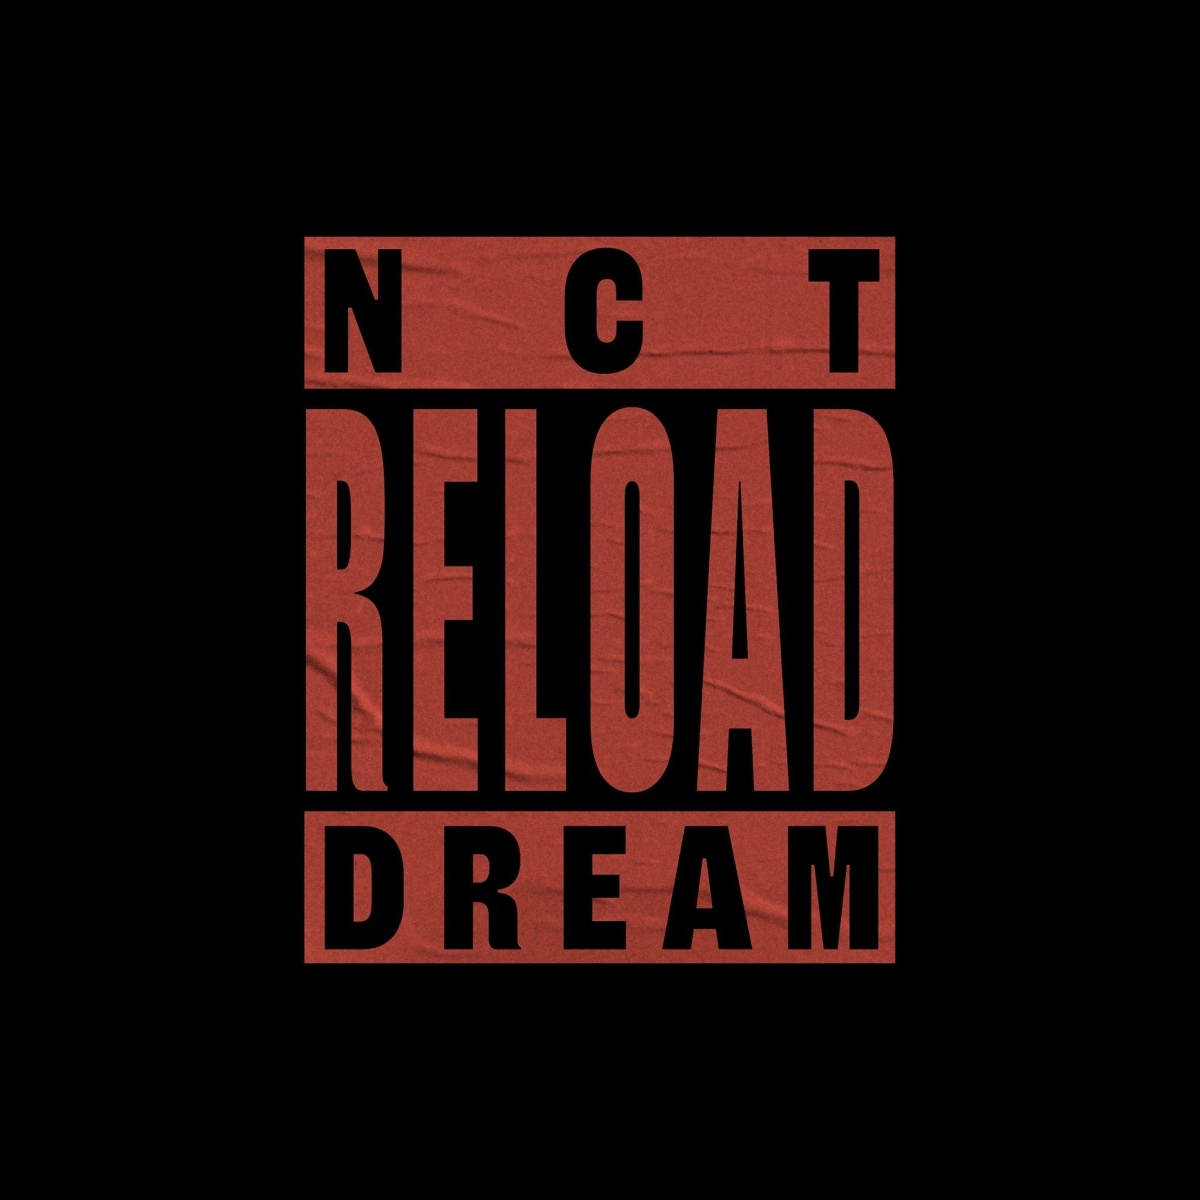 NCT Dream to Go "Ridin'" with "Reload" on April 29